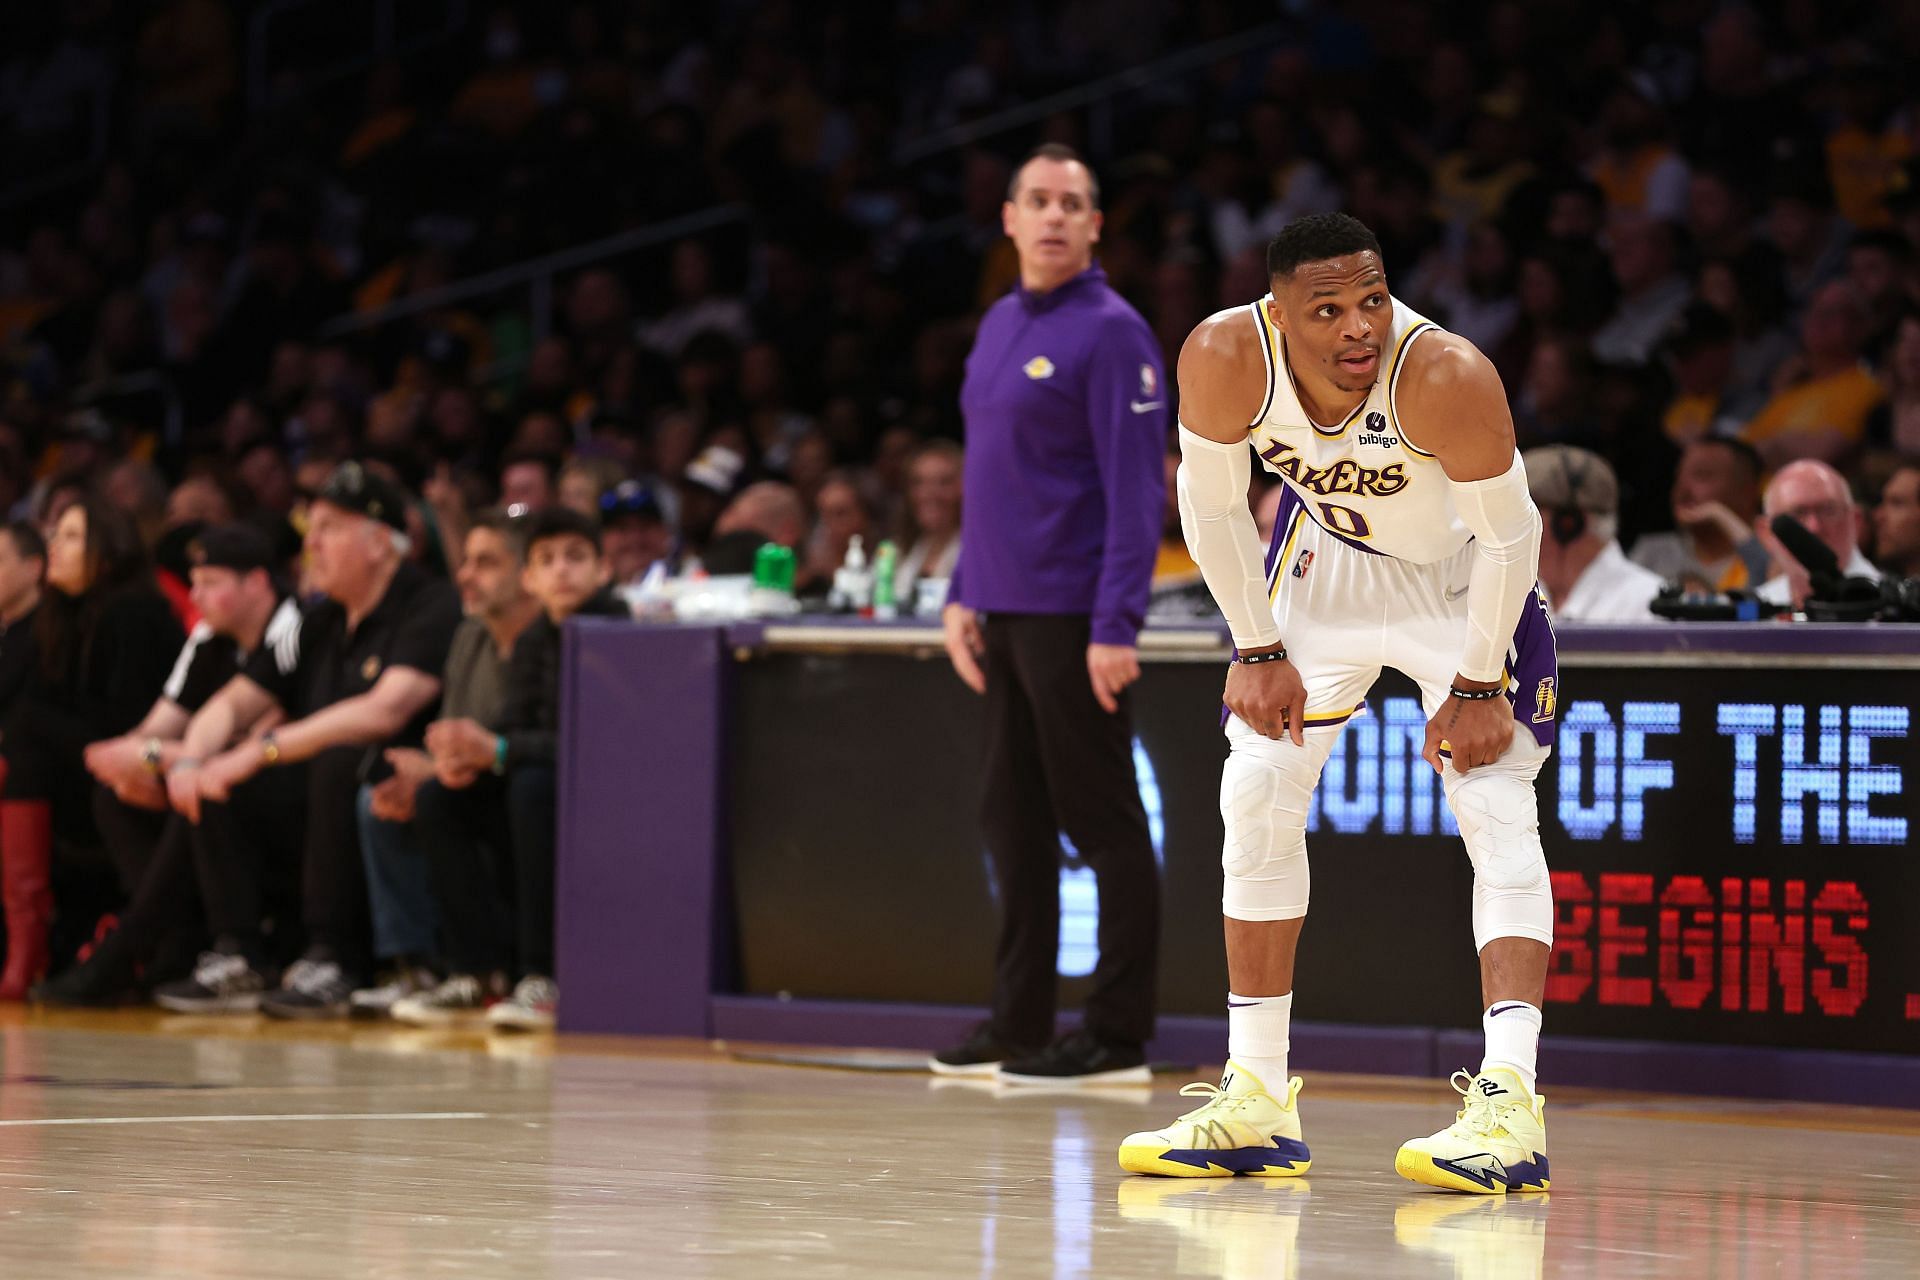 With former coach Frank Vogel gone, the Lakers could keep Russell Westbrook and continue making him the scapegoat.